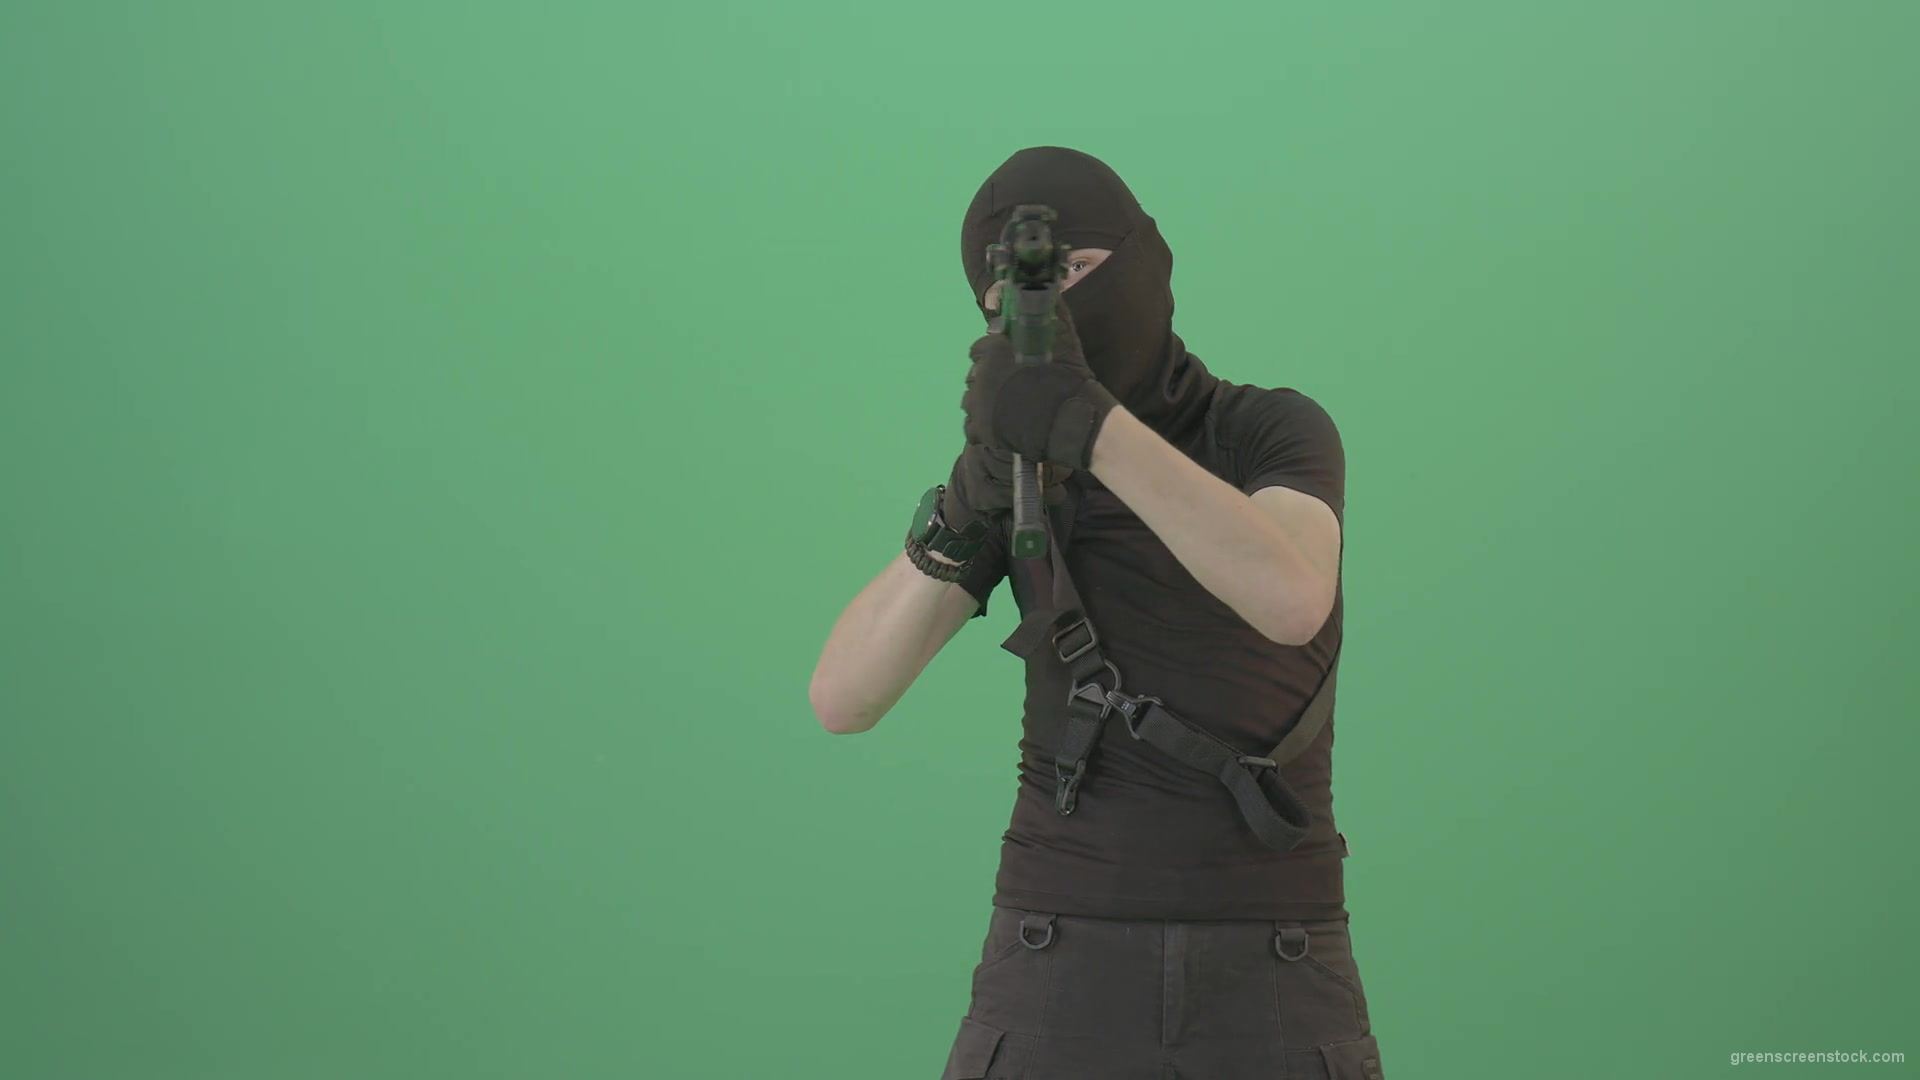 Soldier-in-black-mask-shooting-enemies-with-military-gun-on-green-screen-4K-Video-Footage-1920_004 Green Screen Stock